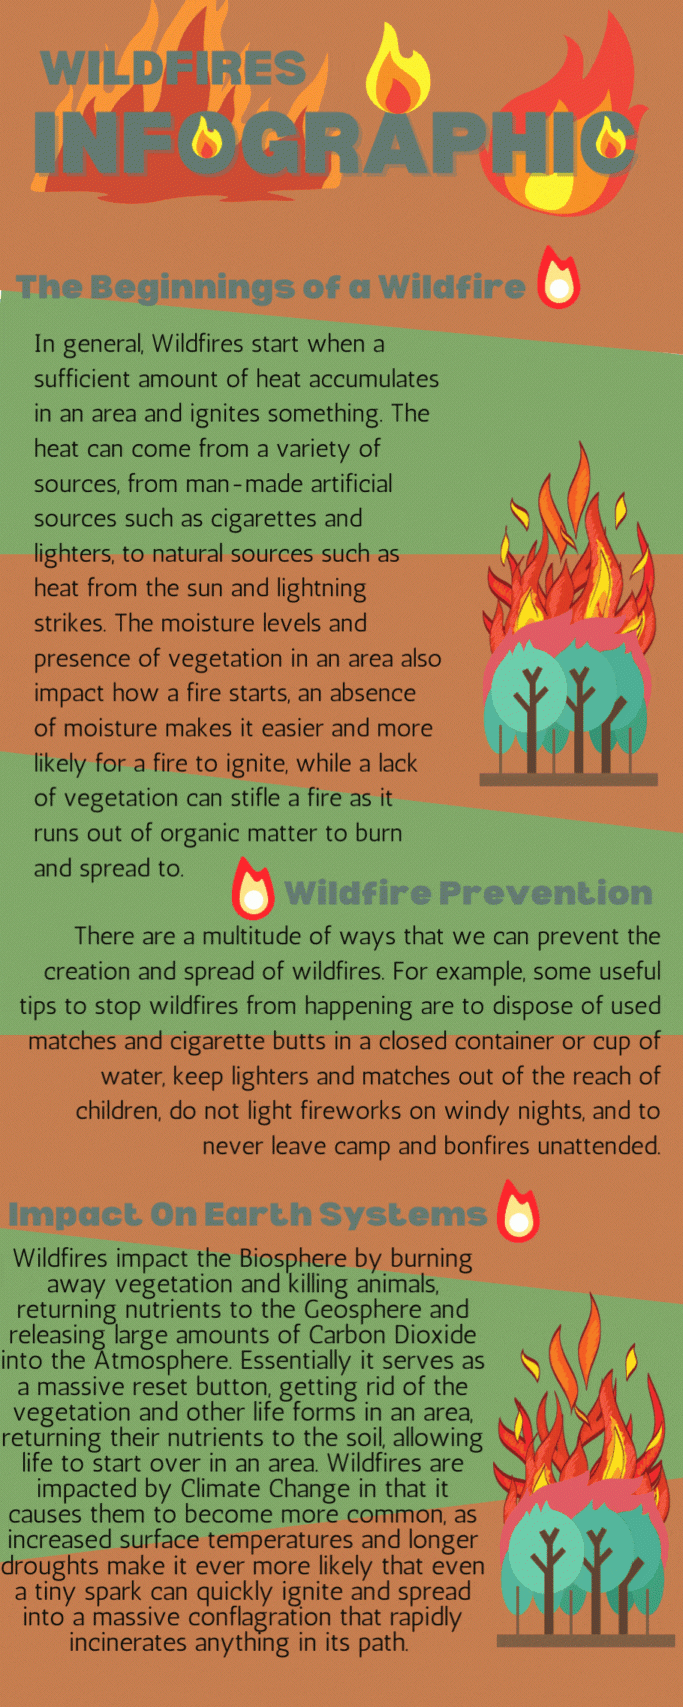 Wildfires Infographic (2)